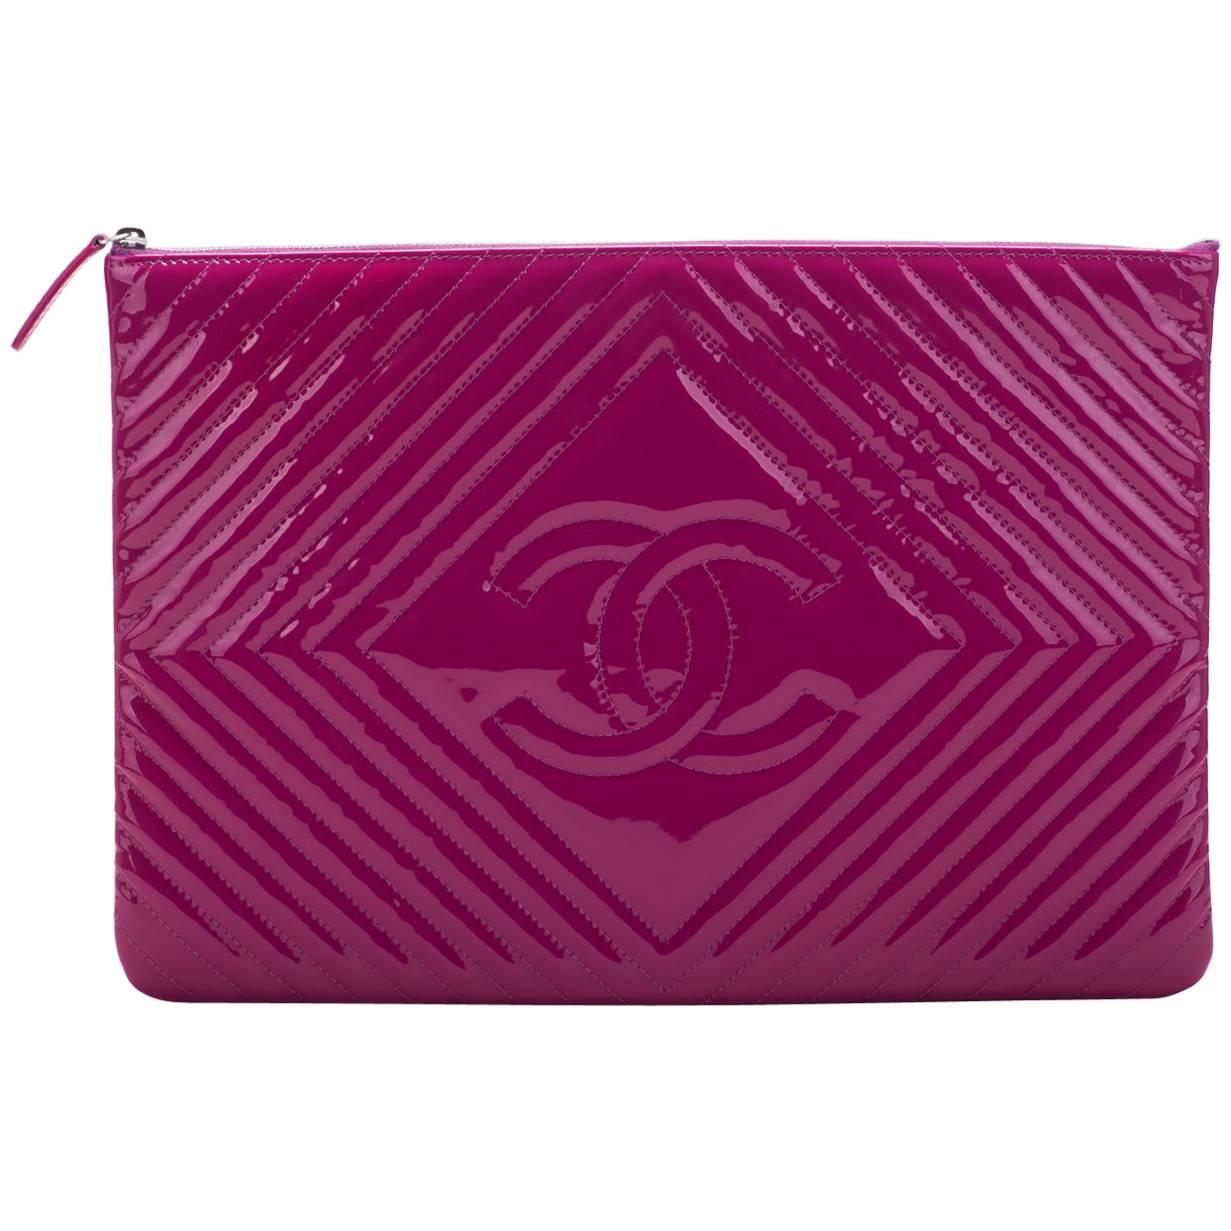 New Chanel Large Magenta Patent Clutch Bag